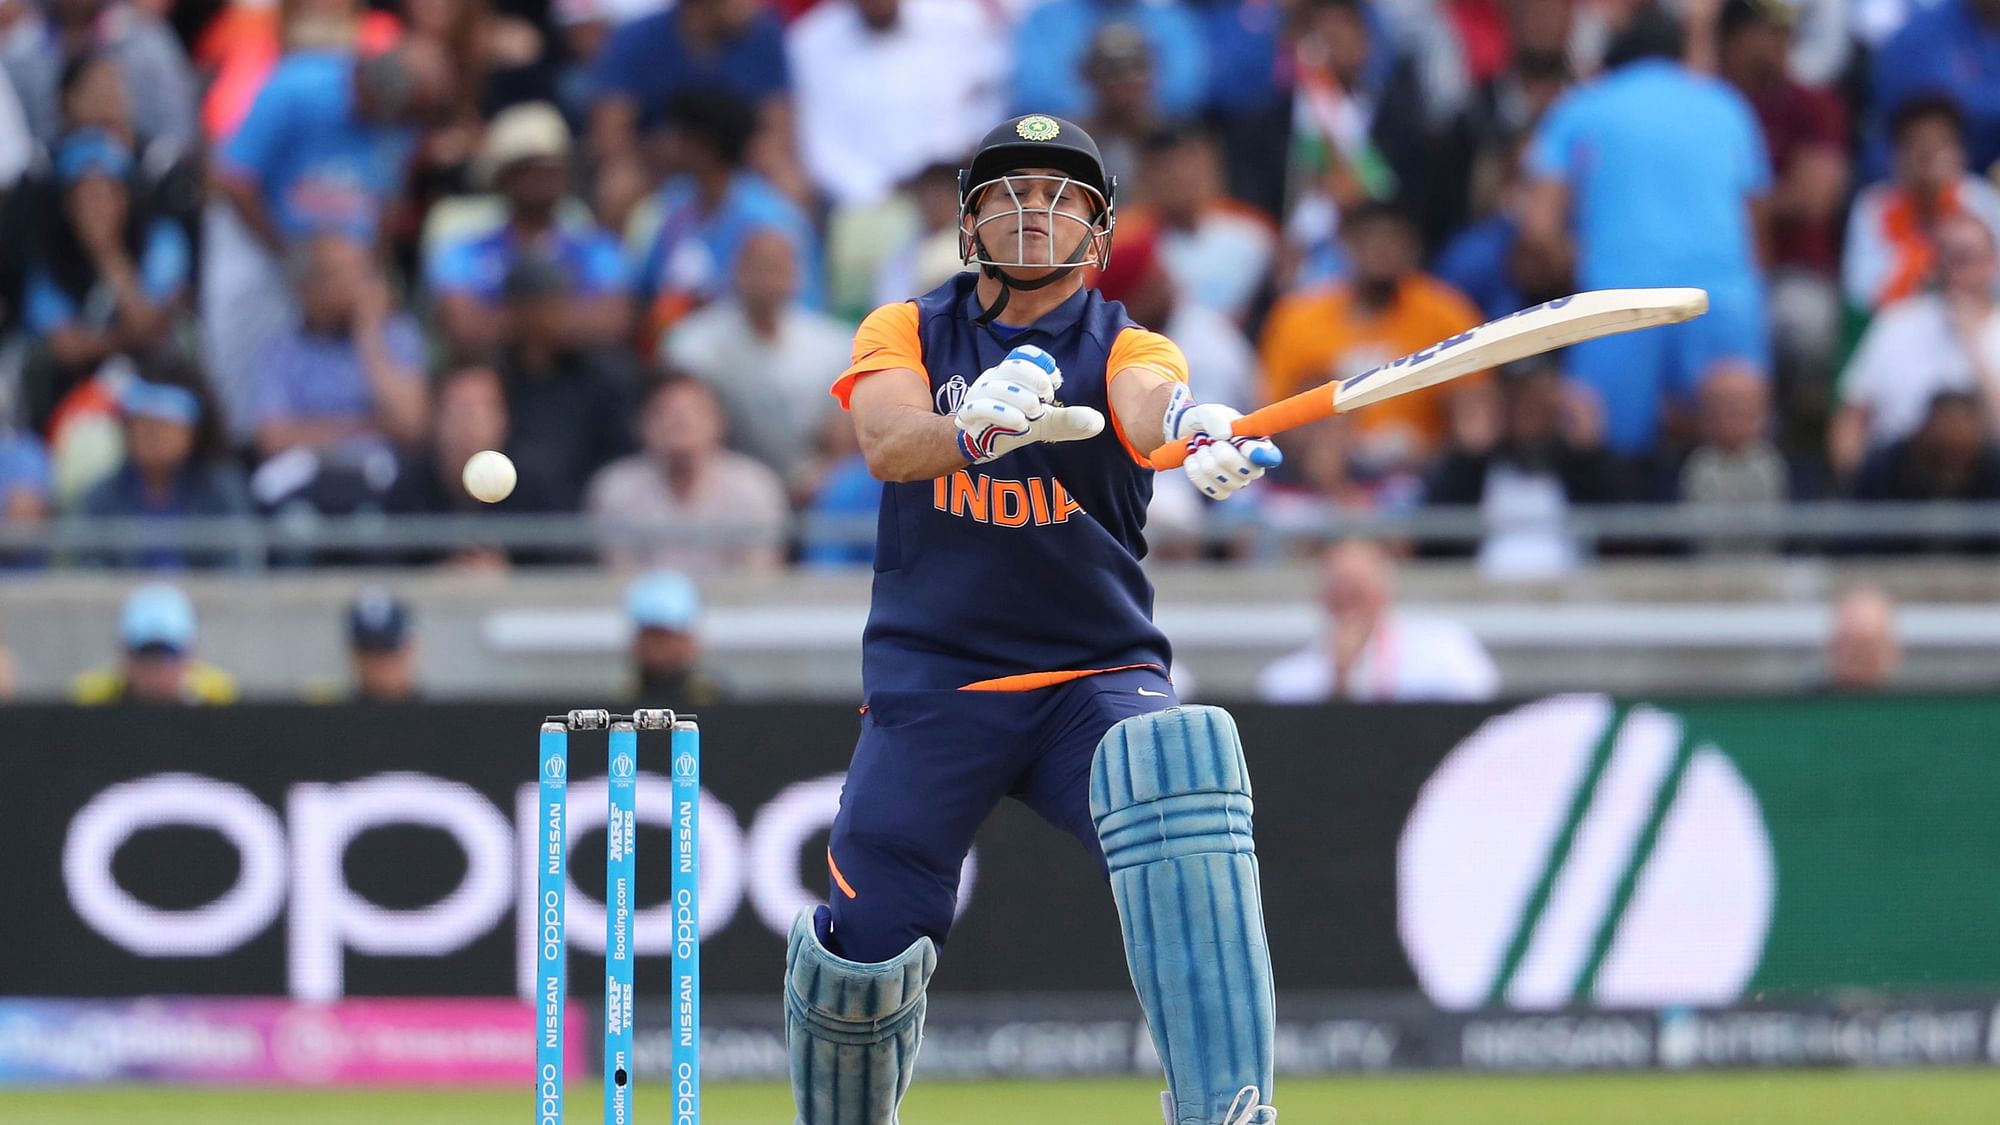 England beat India by 31 runs in the 2019 ICC World Cup.&nbsp;